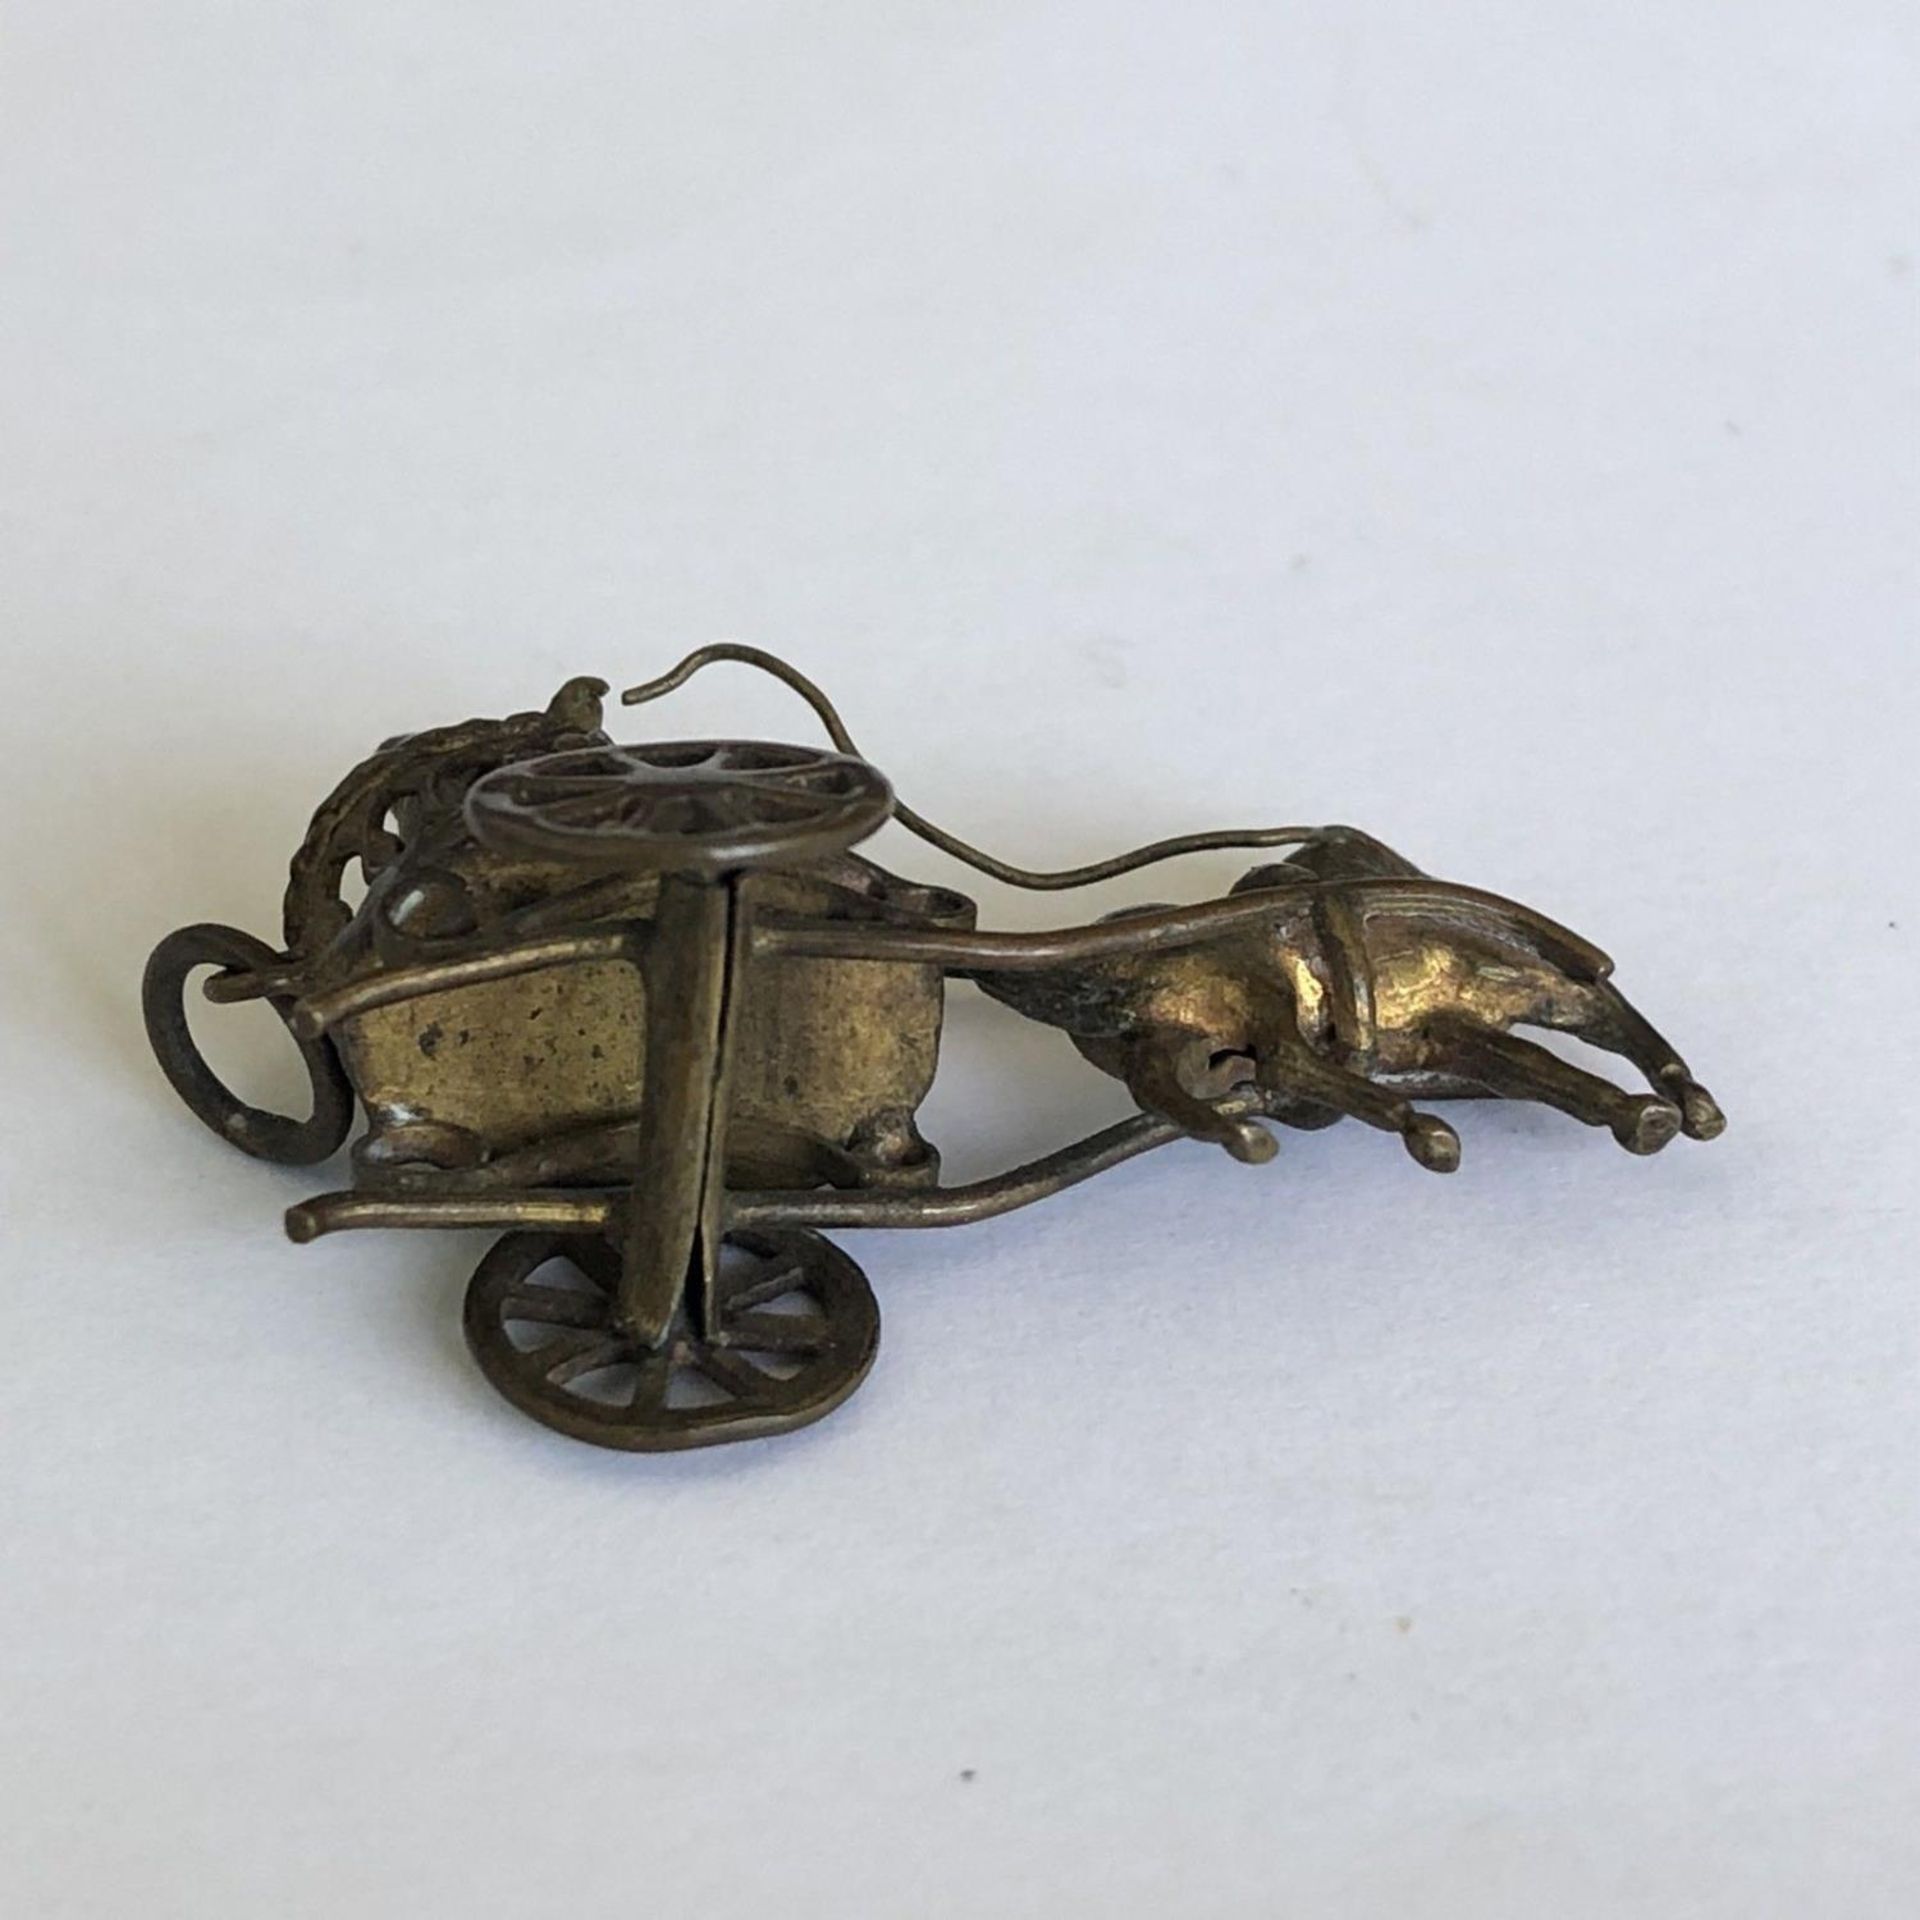 Fine antique yellow metal detailed horse and carriage fob or charm - Image 5 of 5